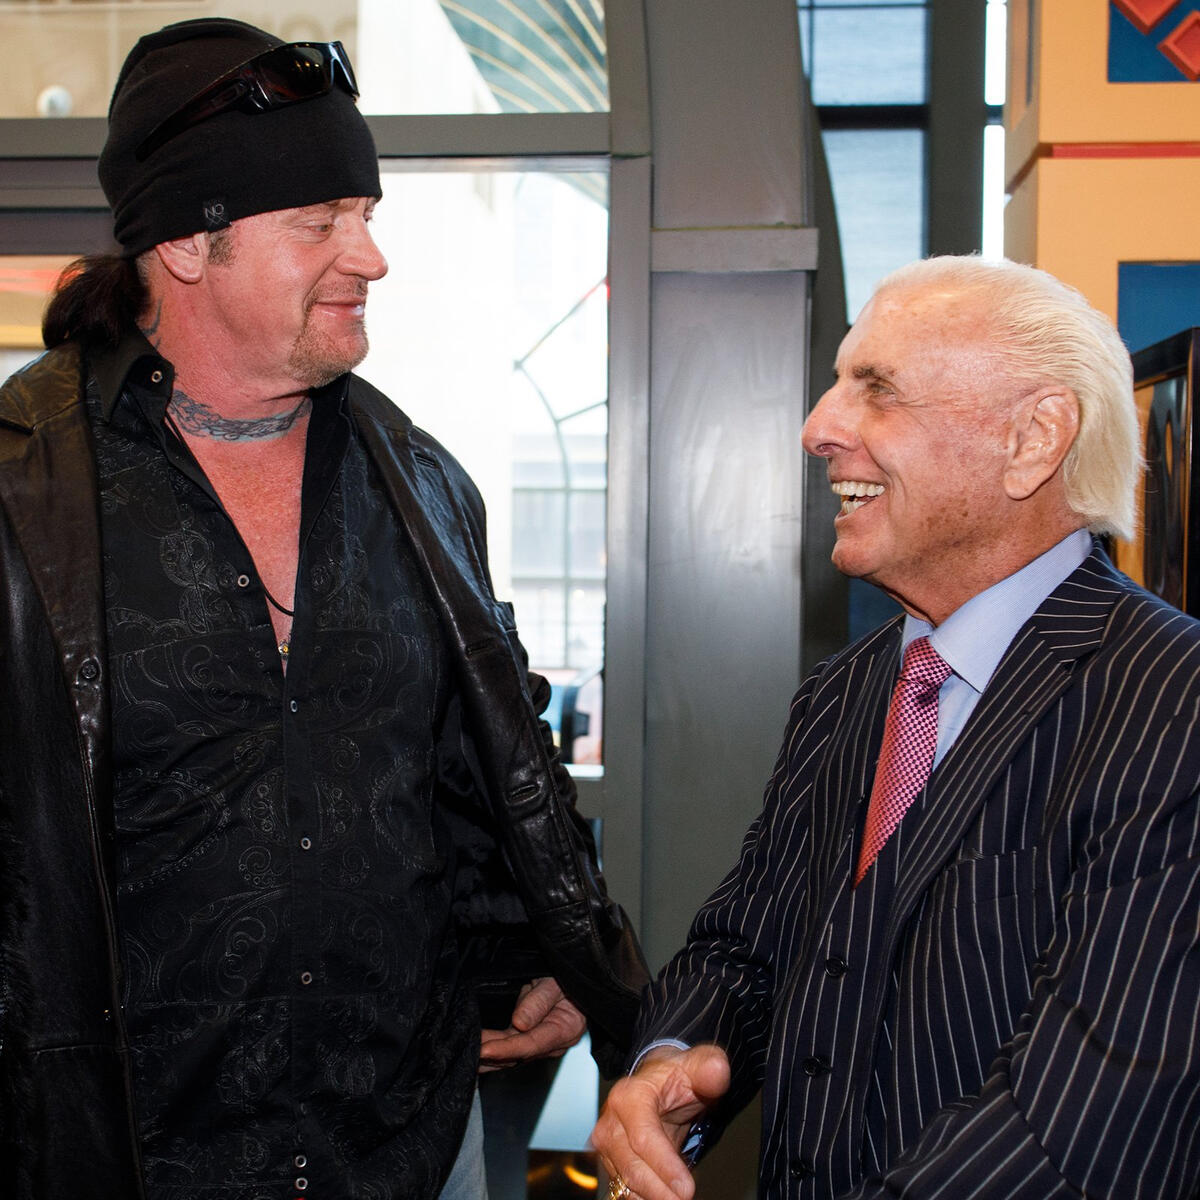 The Undertaker shows his support for the two-time WWE Hall of Famer, Ric Flair.